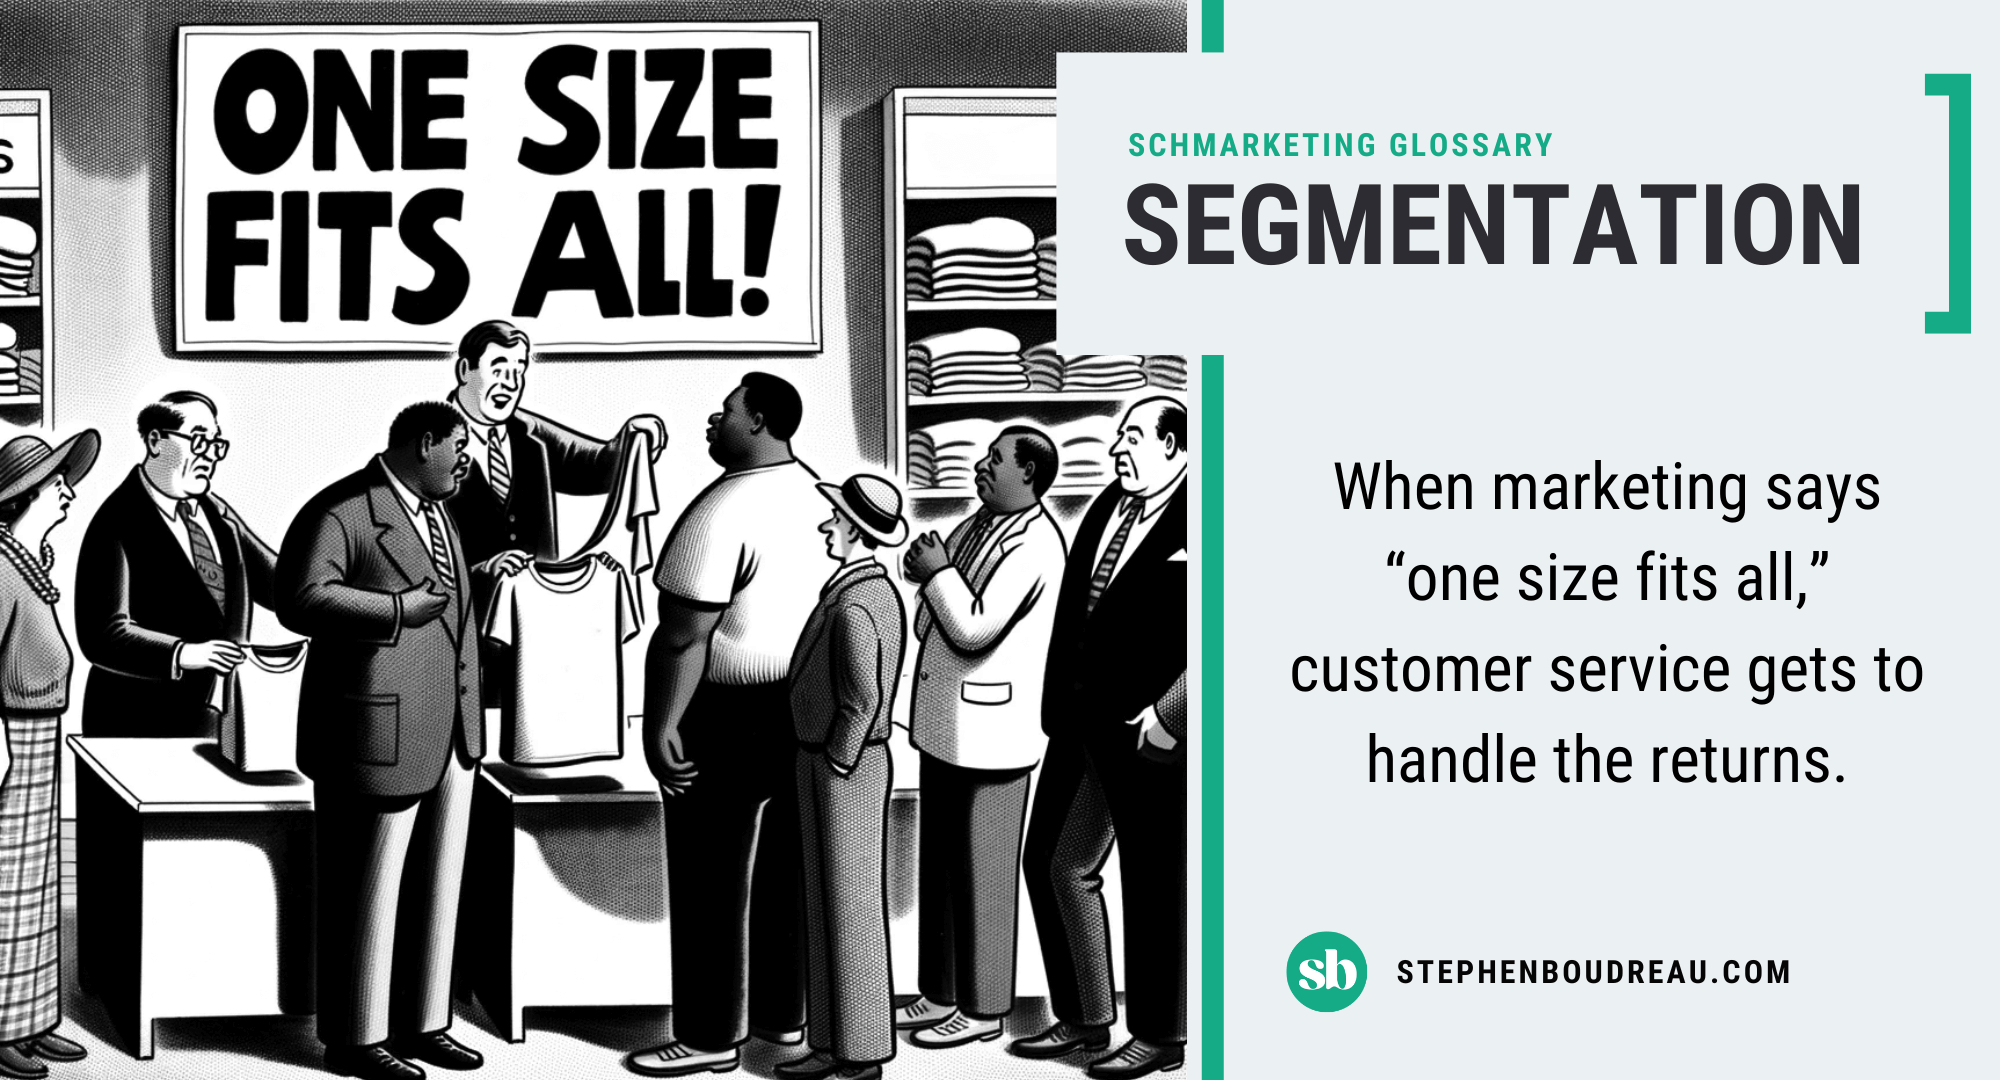 Segmentation: When marketing says “one size fits all,” customer service gets to handle the returns.